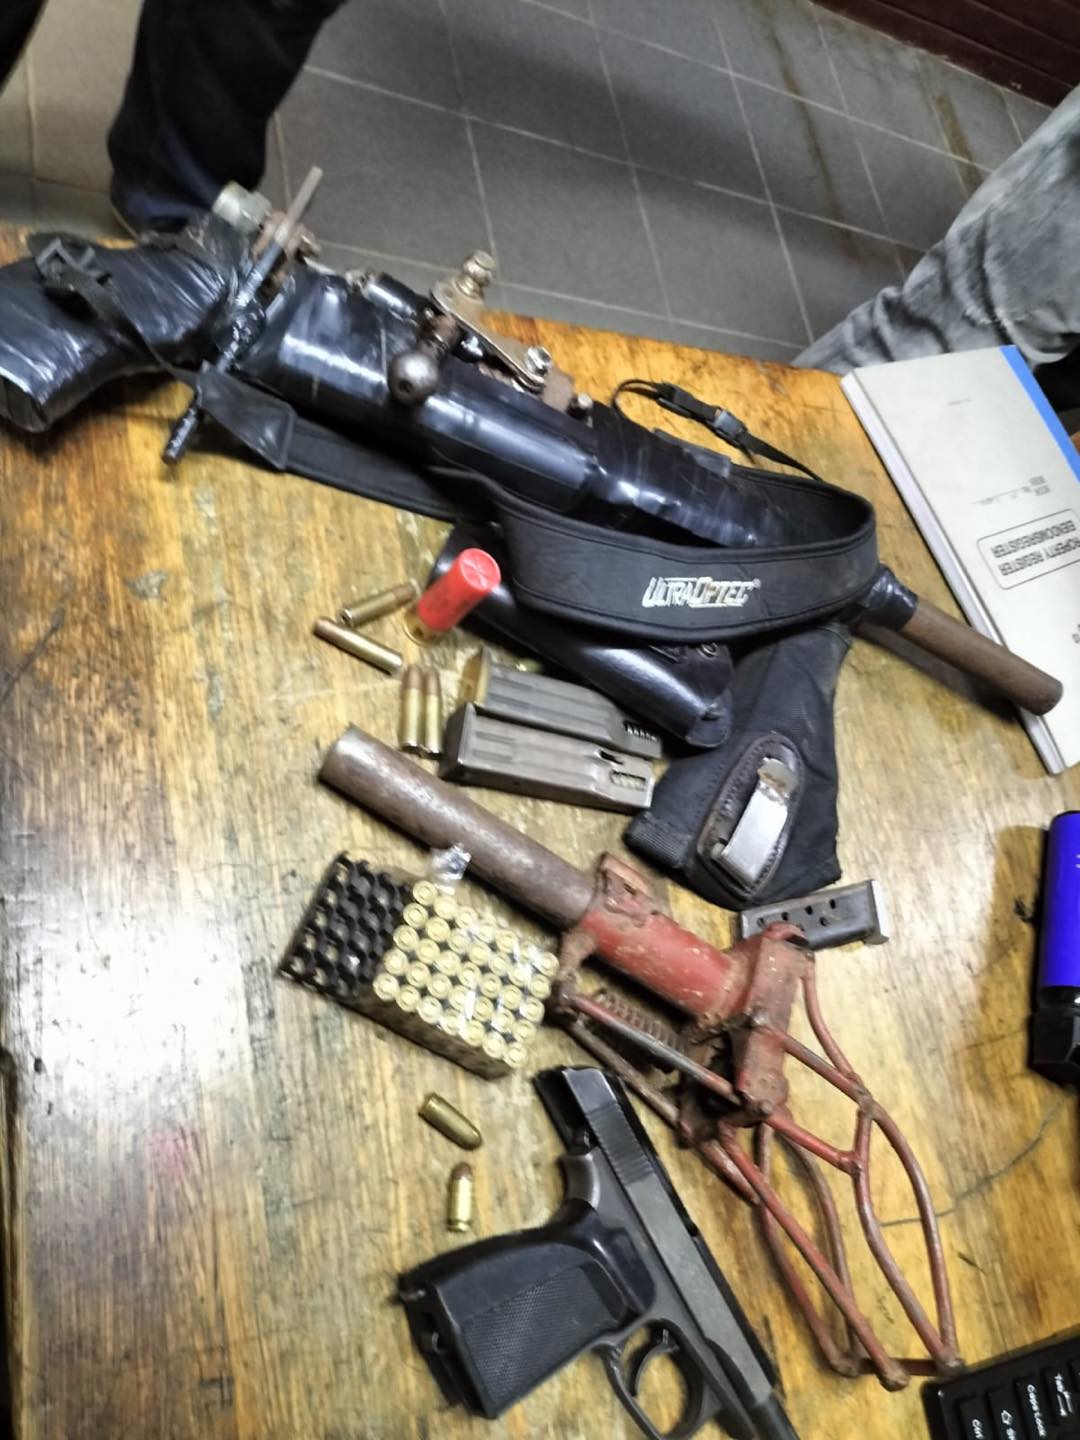 A 26-year-old suspect was arrested for unlawful possession of firearms at Ntumeni